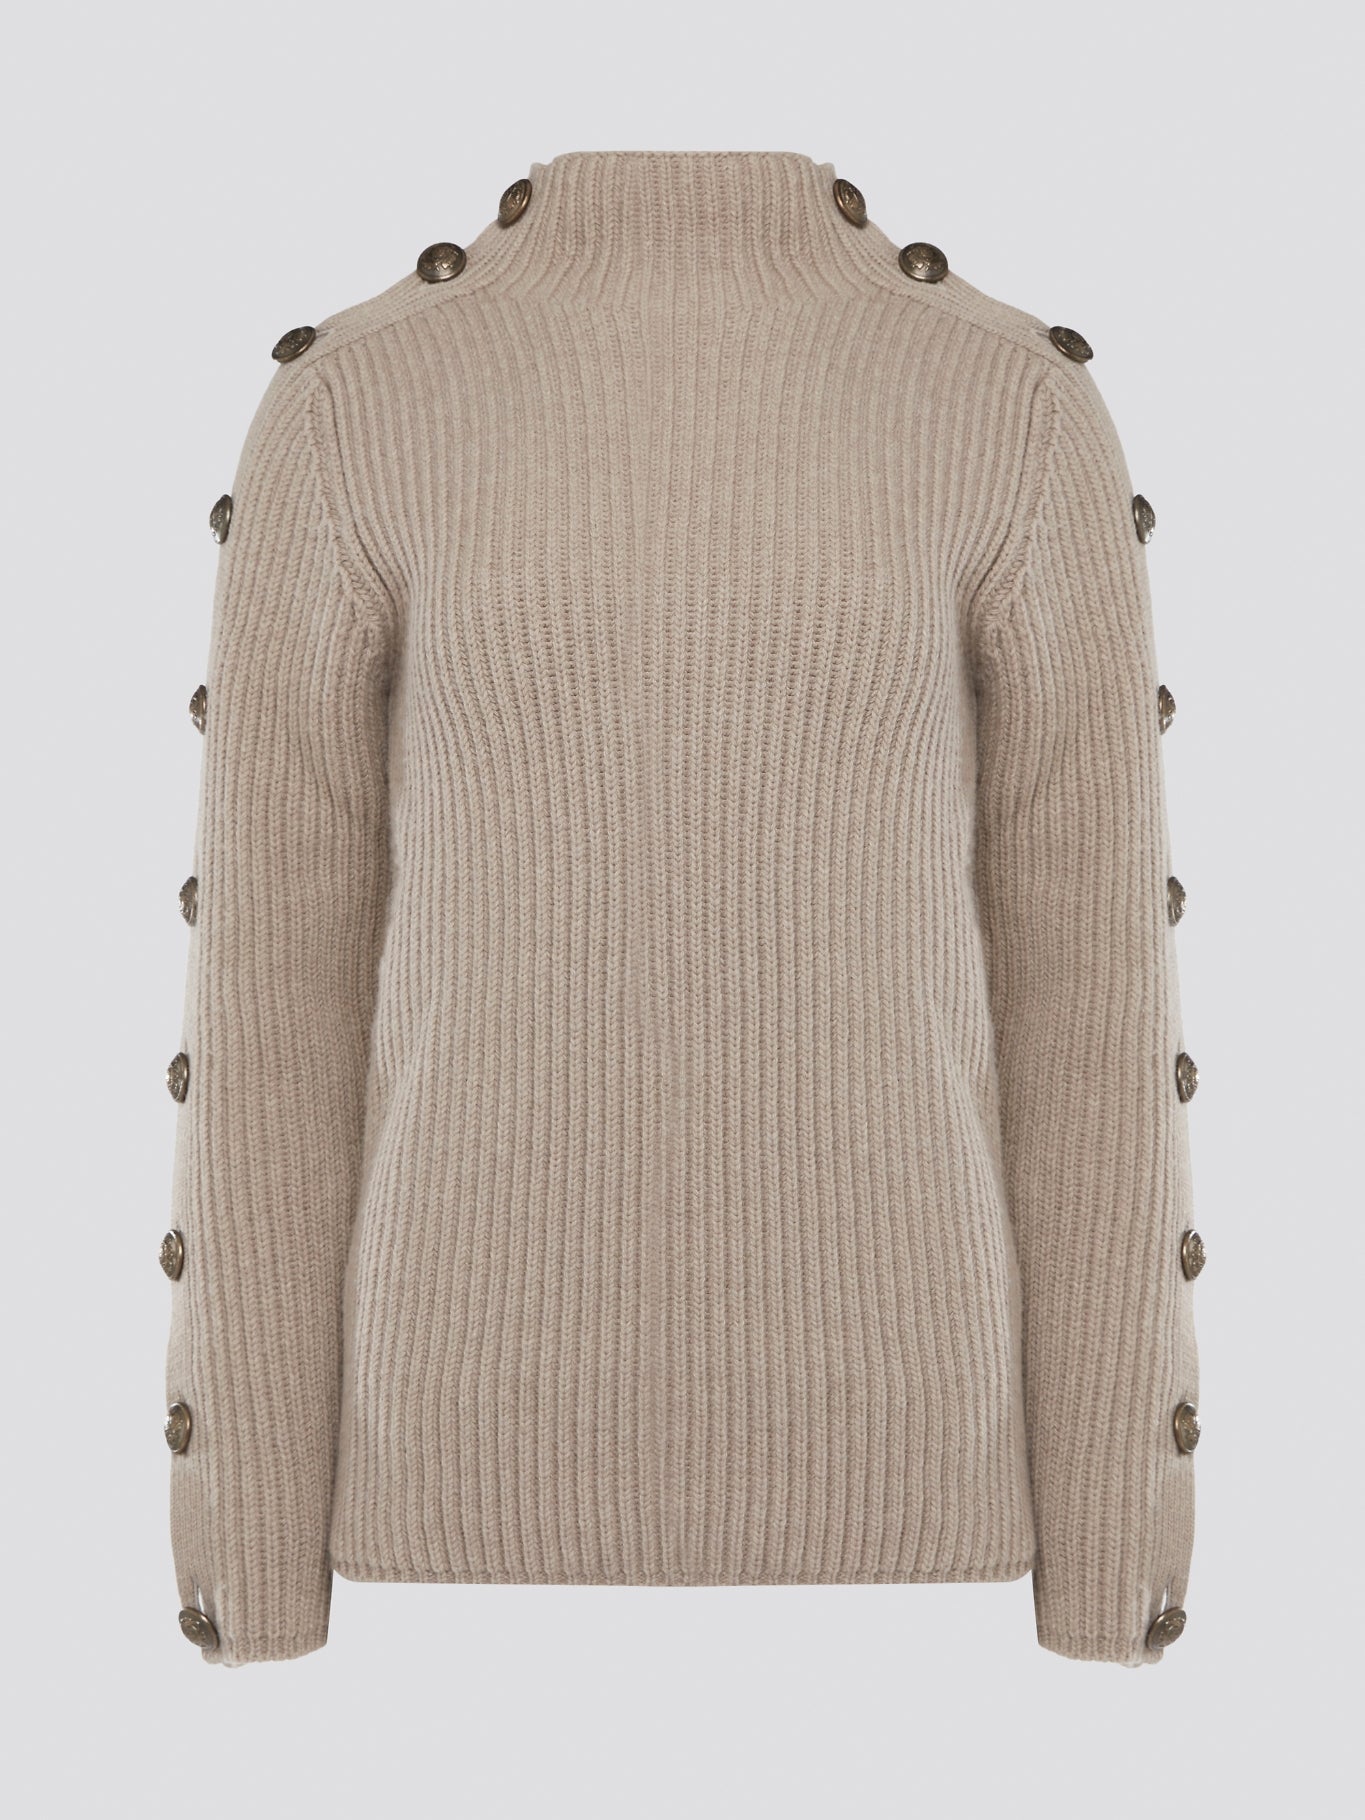 Elevate your sweater game with the luxurious Brown Button Detailed Sweater from Roberto Cavalli. This statement piece features intricate button detailing on the sleeves, adding a touch of sophistication and flair to your look. Stay cozy and stylish in this must-have staple for your fall and winter wardrobe.